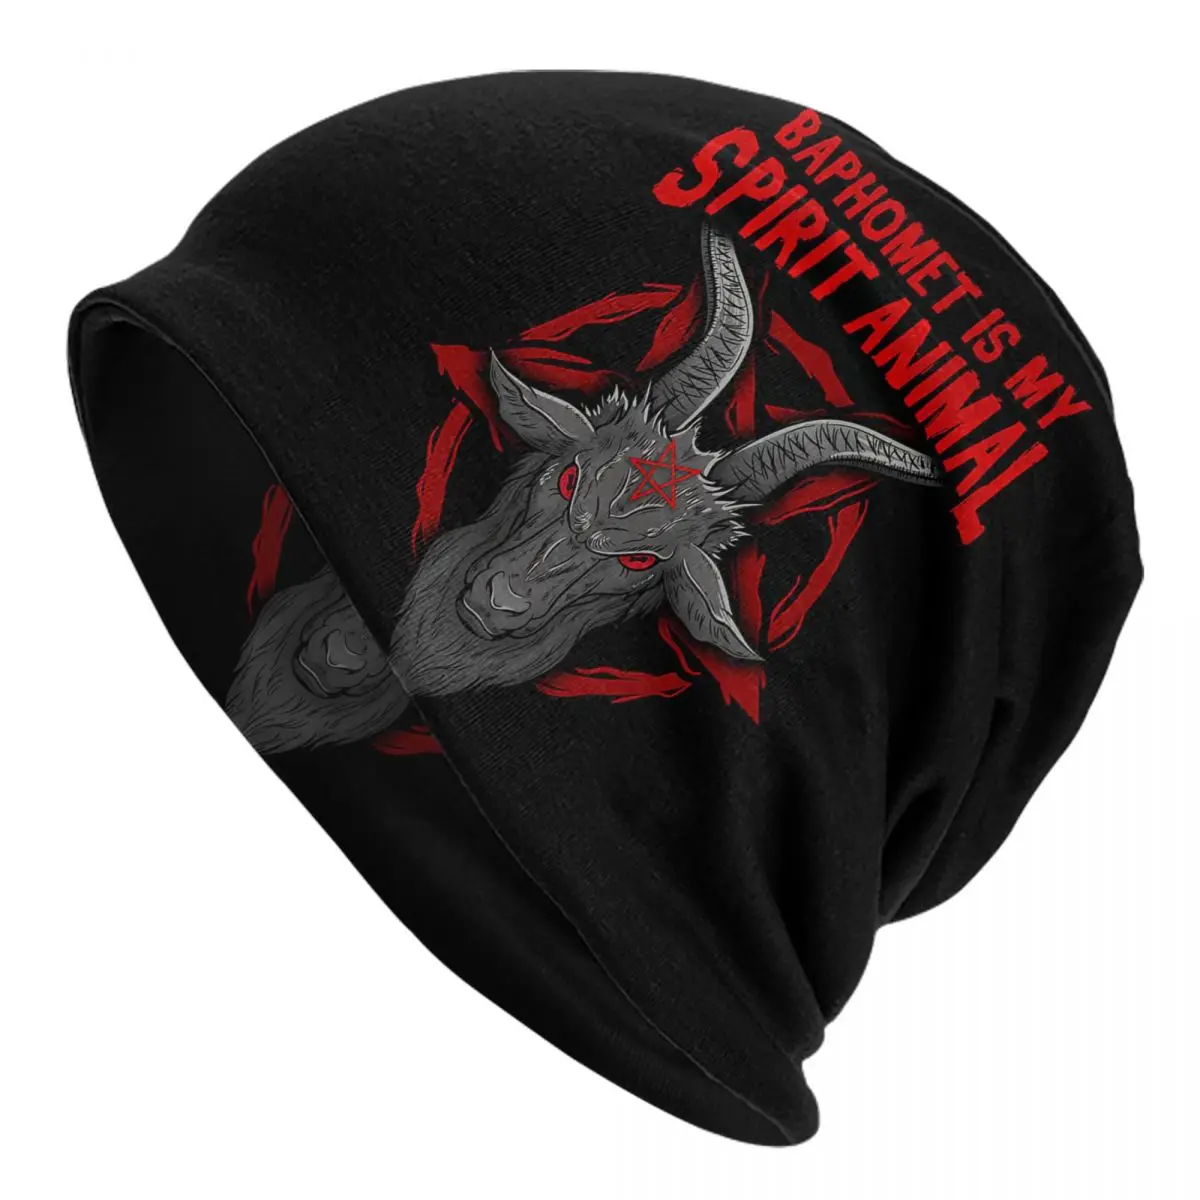 Baphomet Is My Spirit Animal I Satanic Occult Goat Graphic Adult Men's Women's Knit Hat Keep warm winter Funny knitted hat